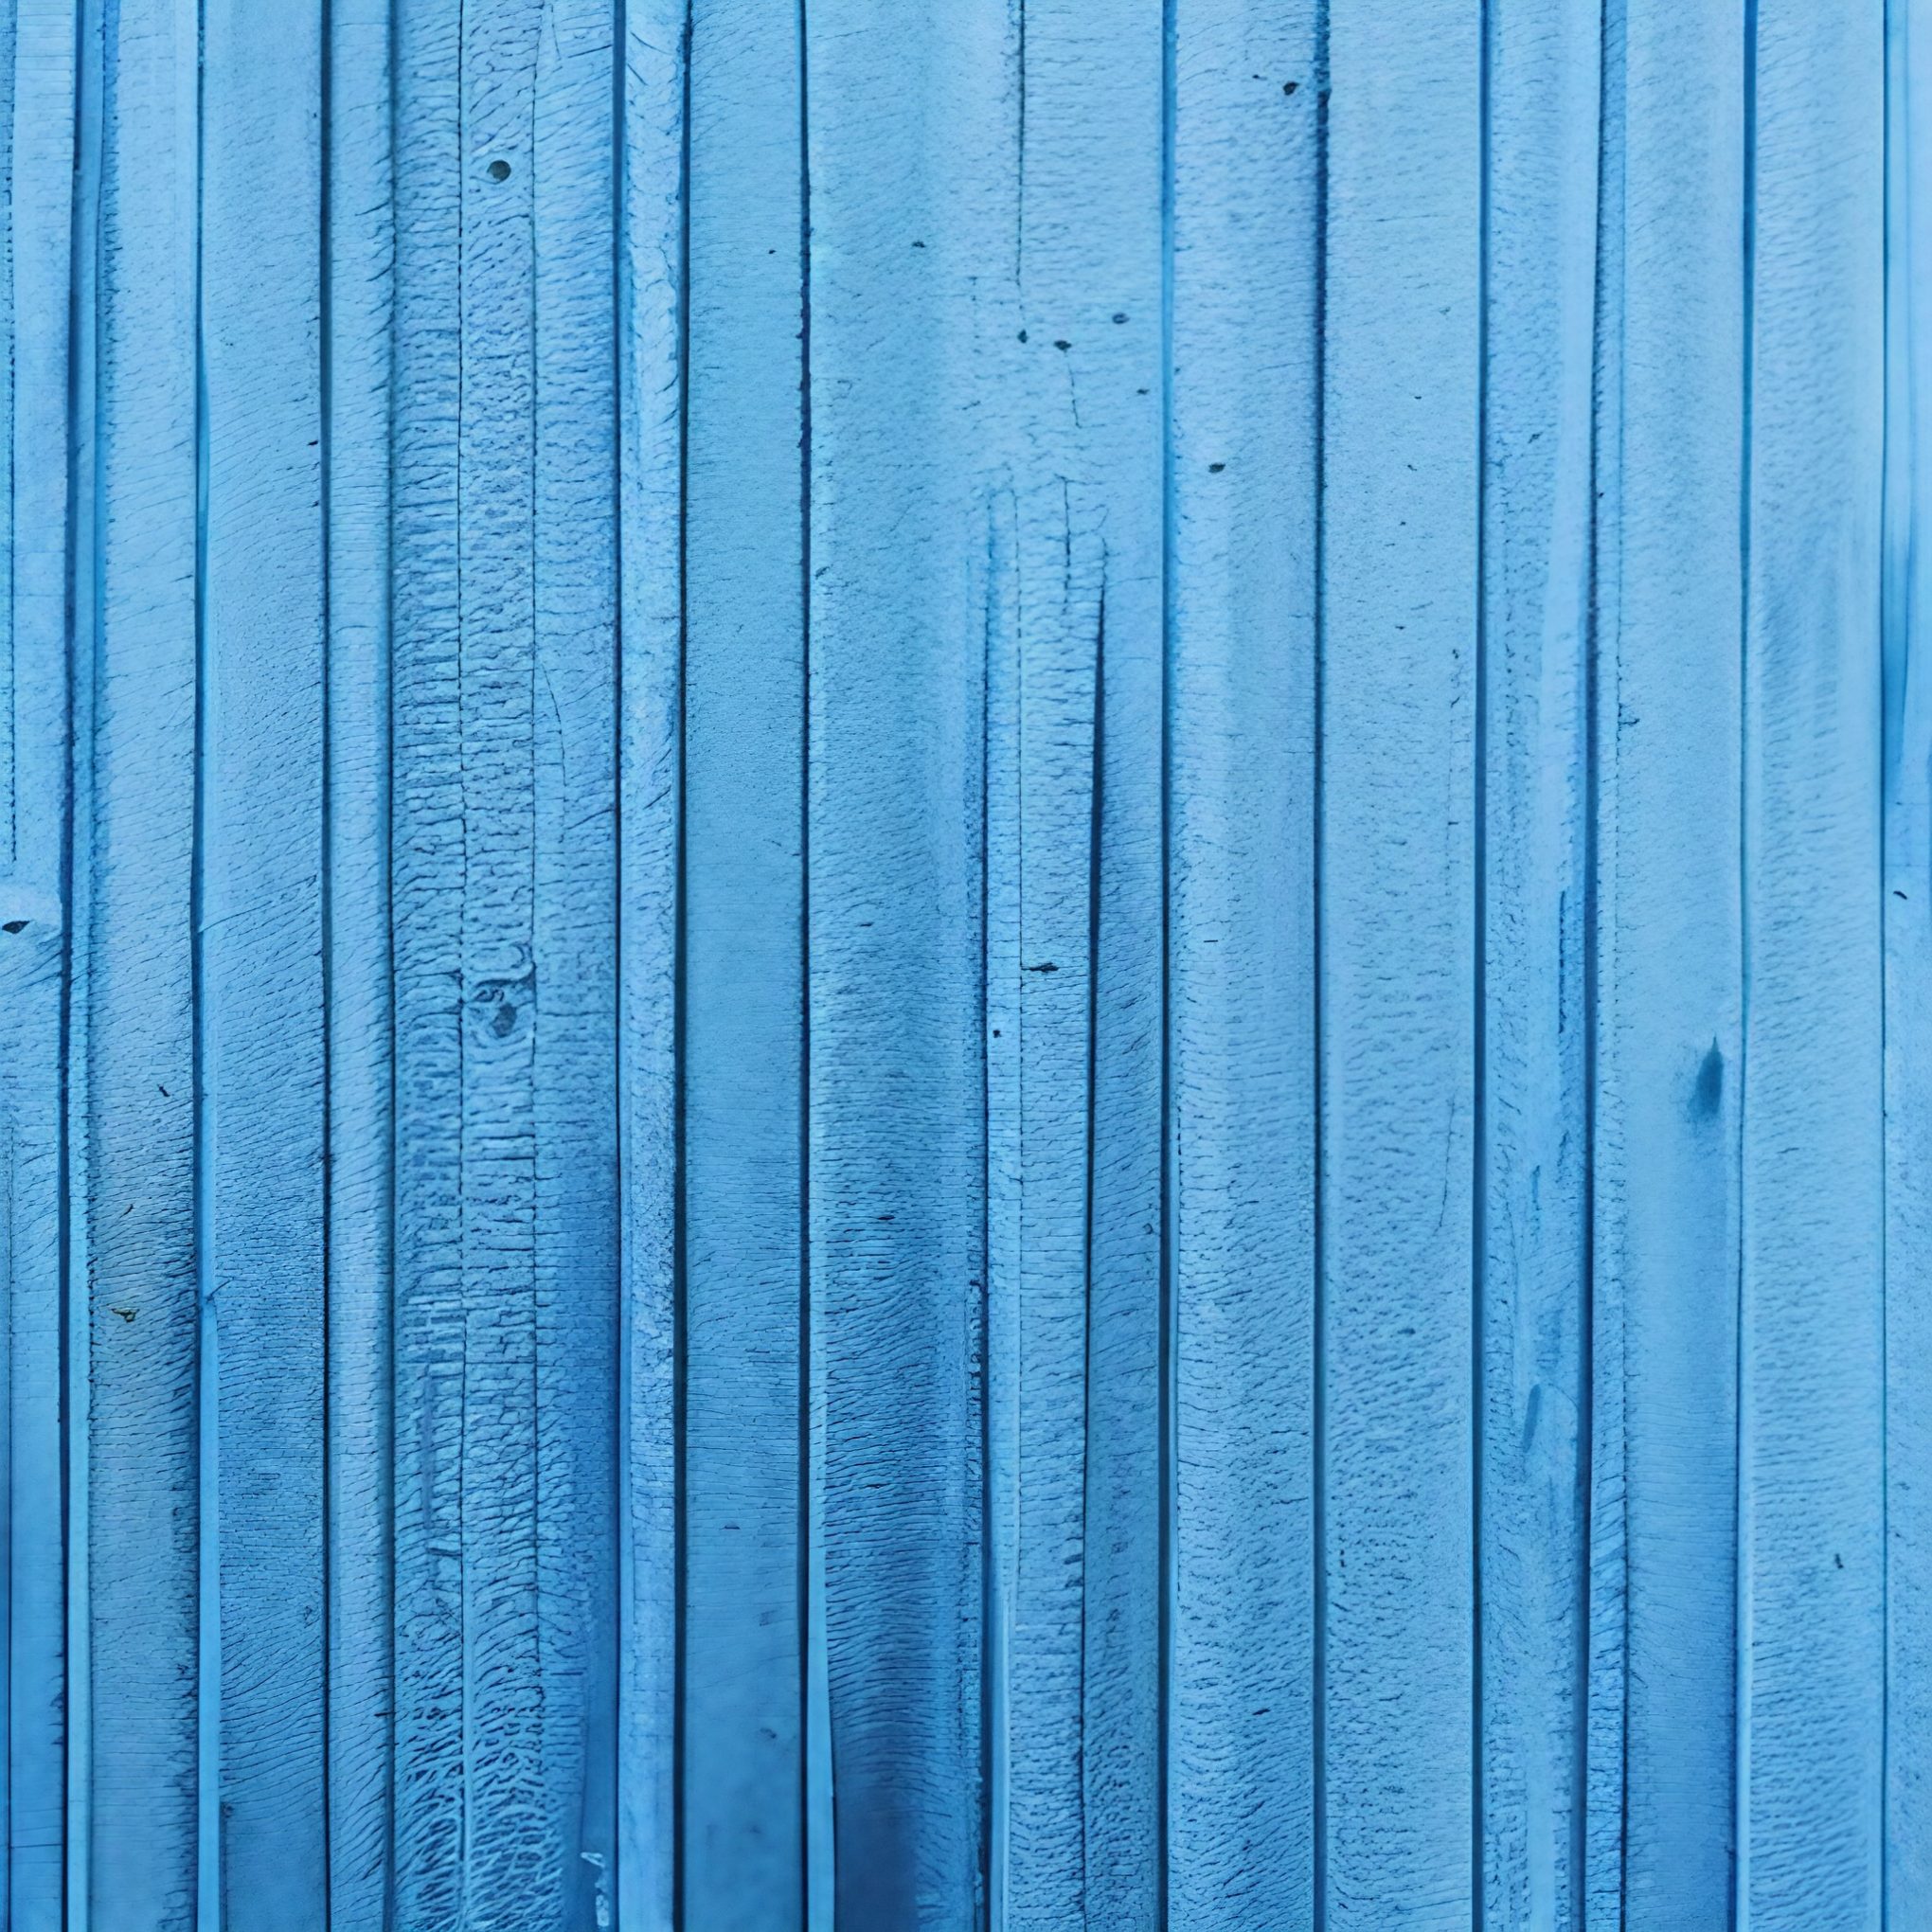 Blue Wooden Planks Background Texture Free Stock Image